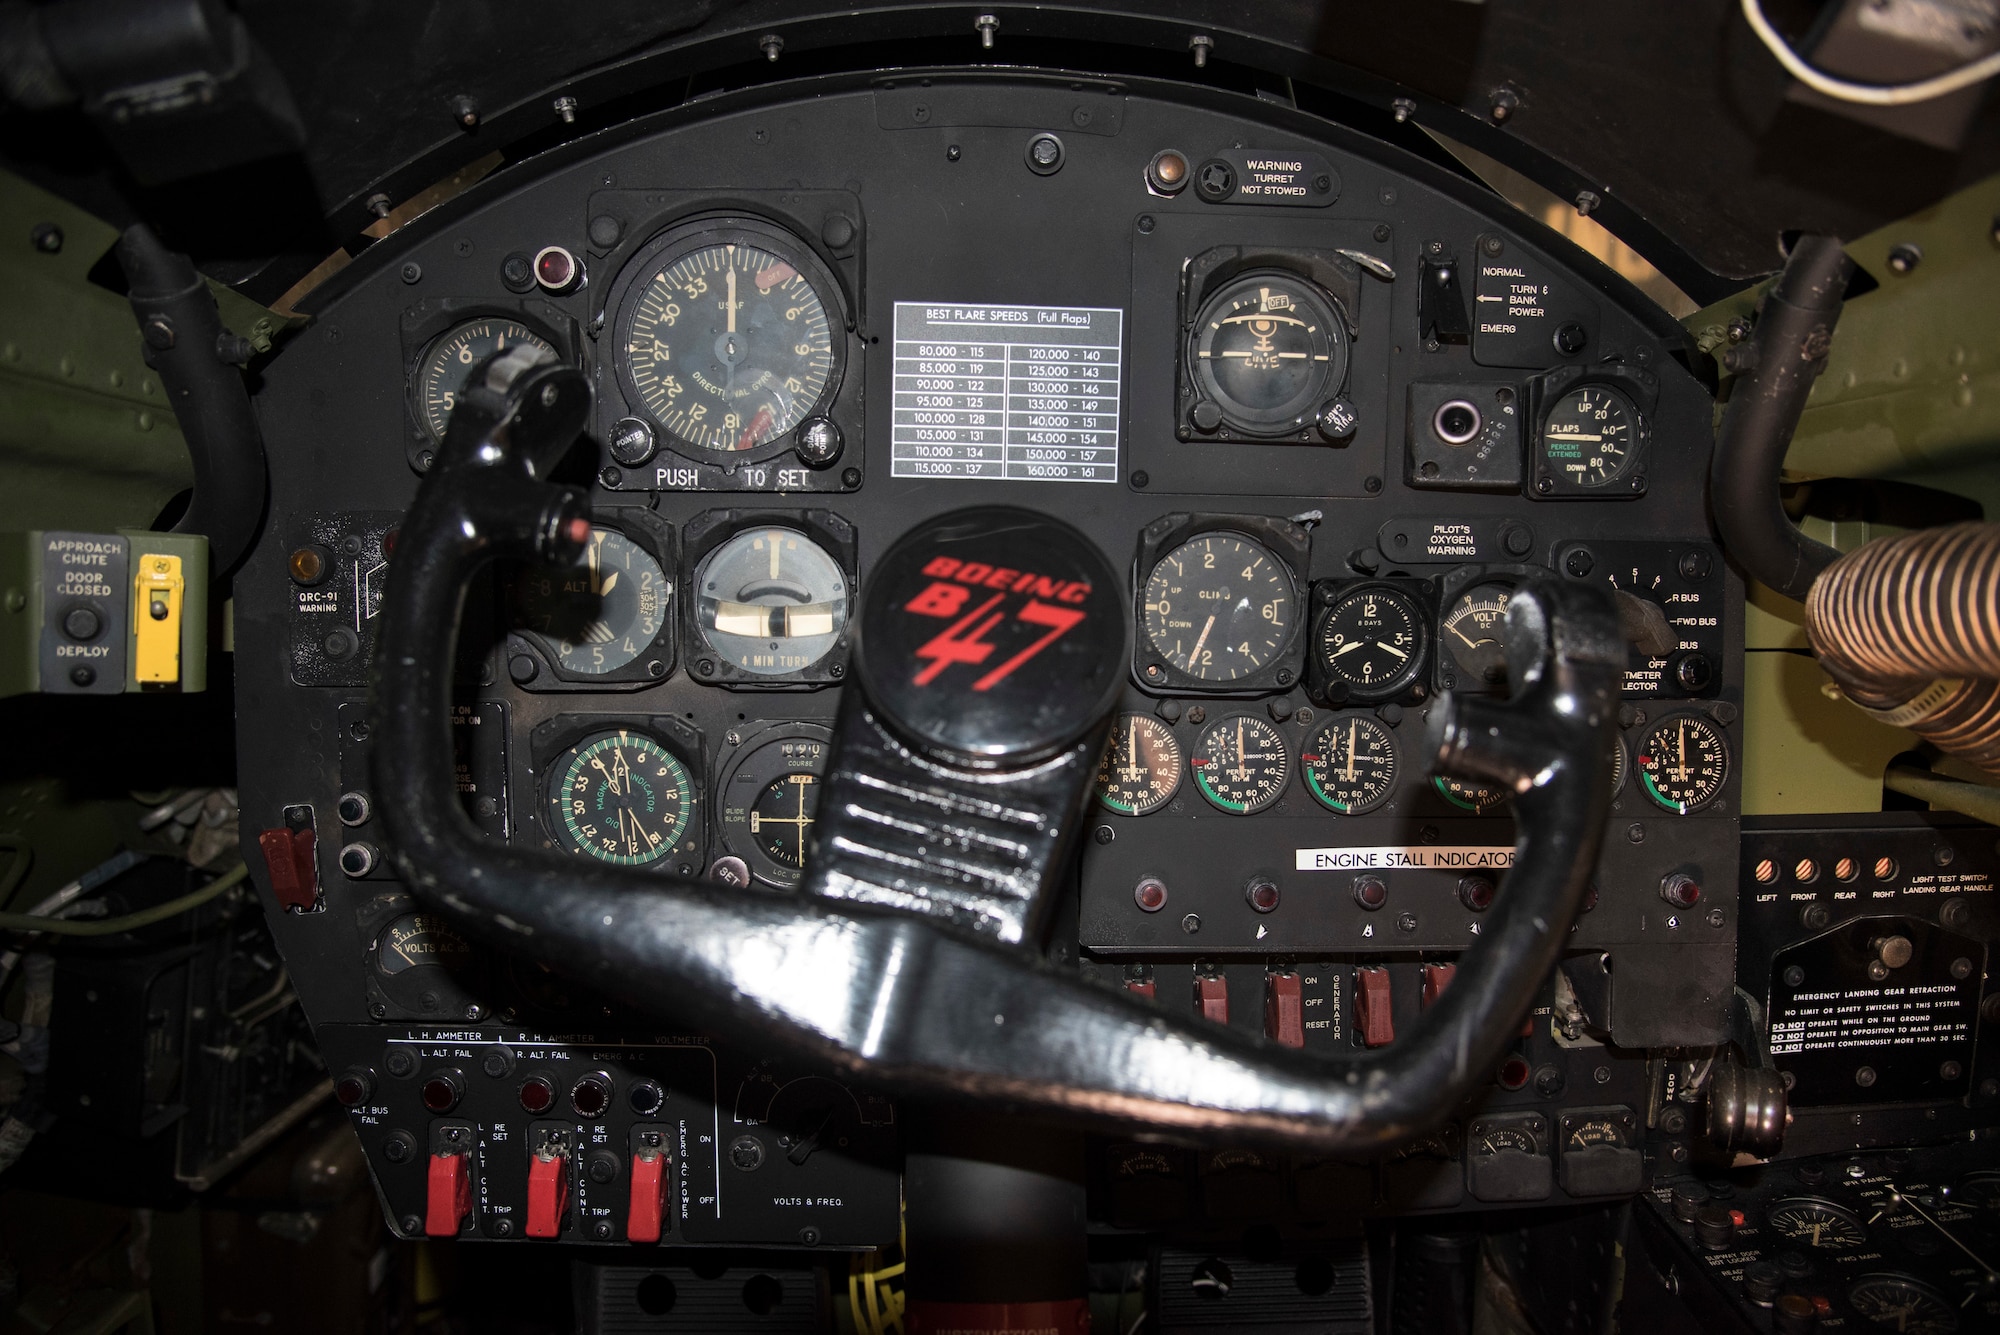 DAYTON, Ohio -- Boeing RB-47H Stratojet co-pilot controls at the National Museum of the United States Air Force. (U.S. Air Force photo by Ken LaRock)